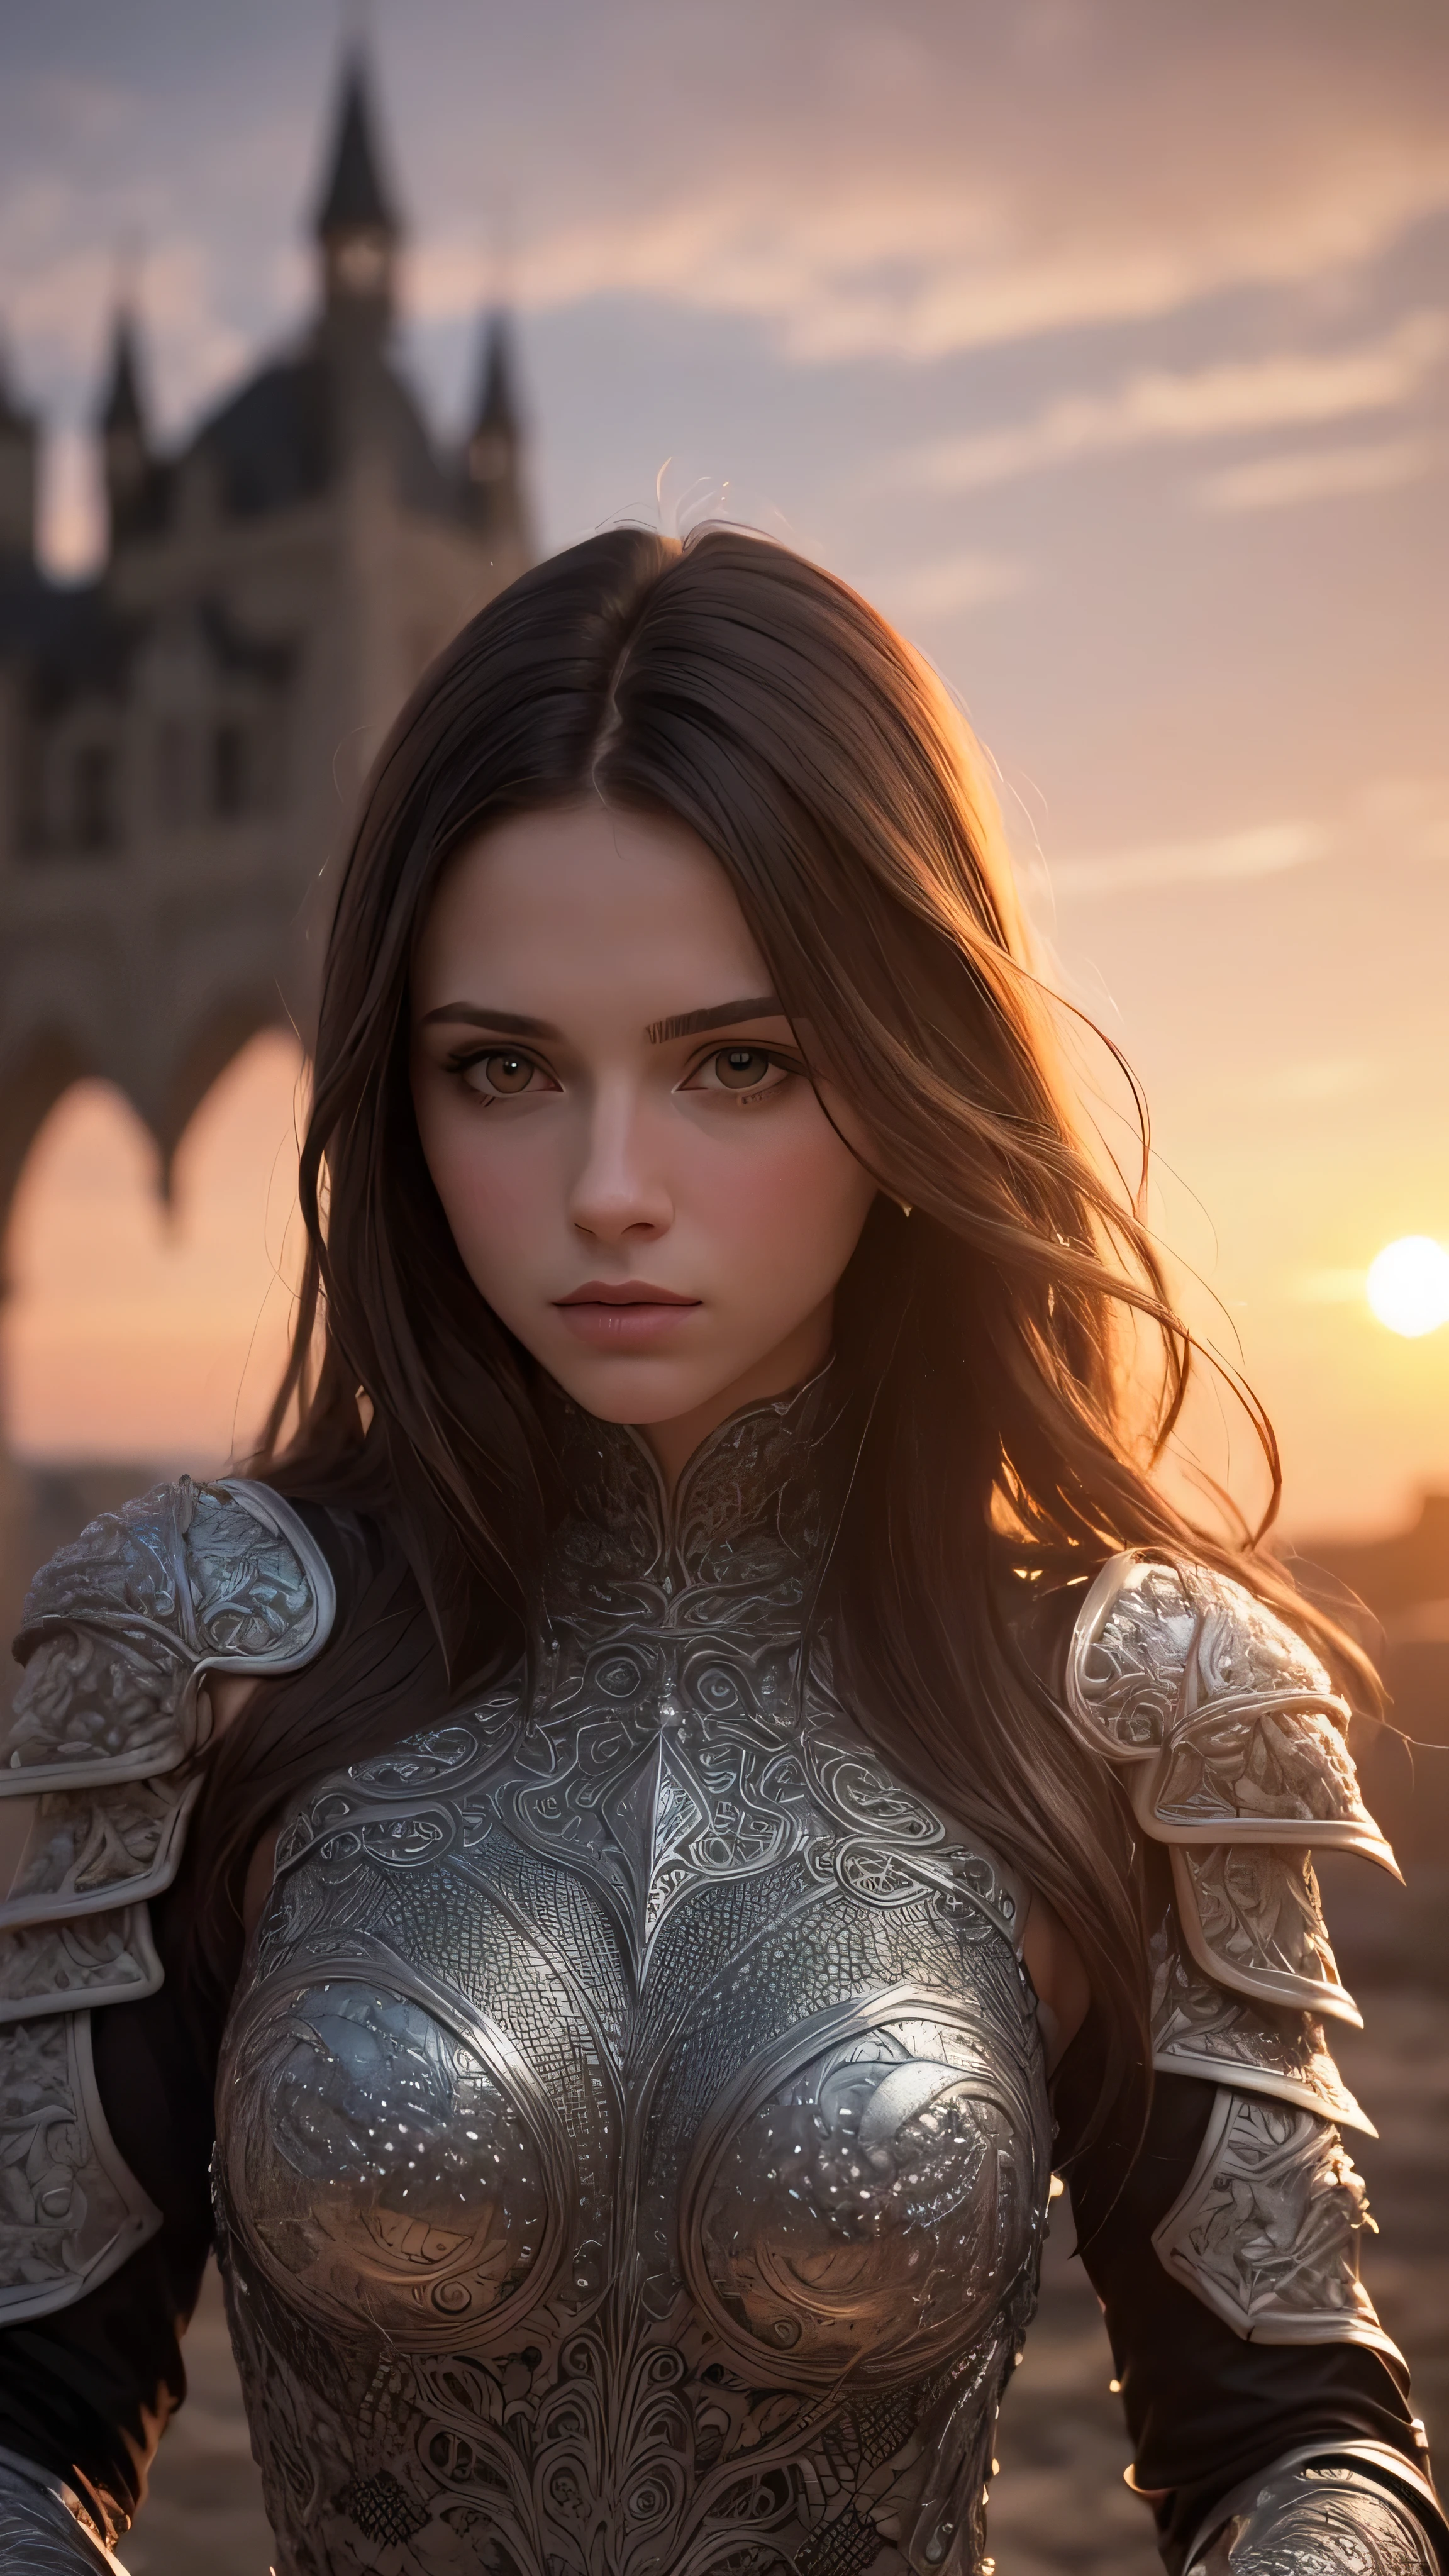 (masterpiece), (extremely intricate:1.3), (realistic), portrait of a girl, the most beautiful in the world, (medieval armor), metal reflections, upper body, outdoors, intense sunlight, far away castle, professional photograph of a stunning woman detailed, sharp focus, dramatic, award winning, cinematic lighting, , volumetrics dtx, (film grain, blurry background, blurry foreground, bokeh, depth of field, sunset,interaction, Perfectchainmail